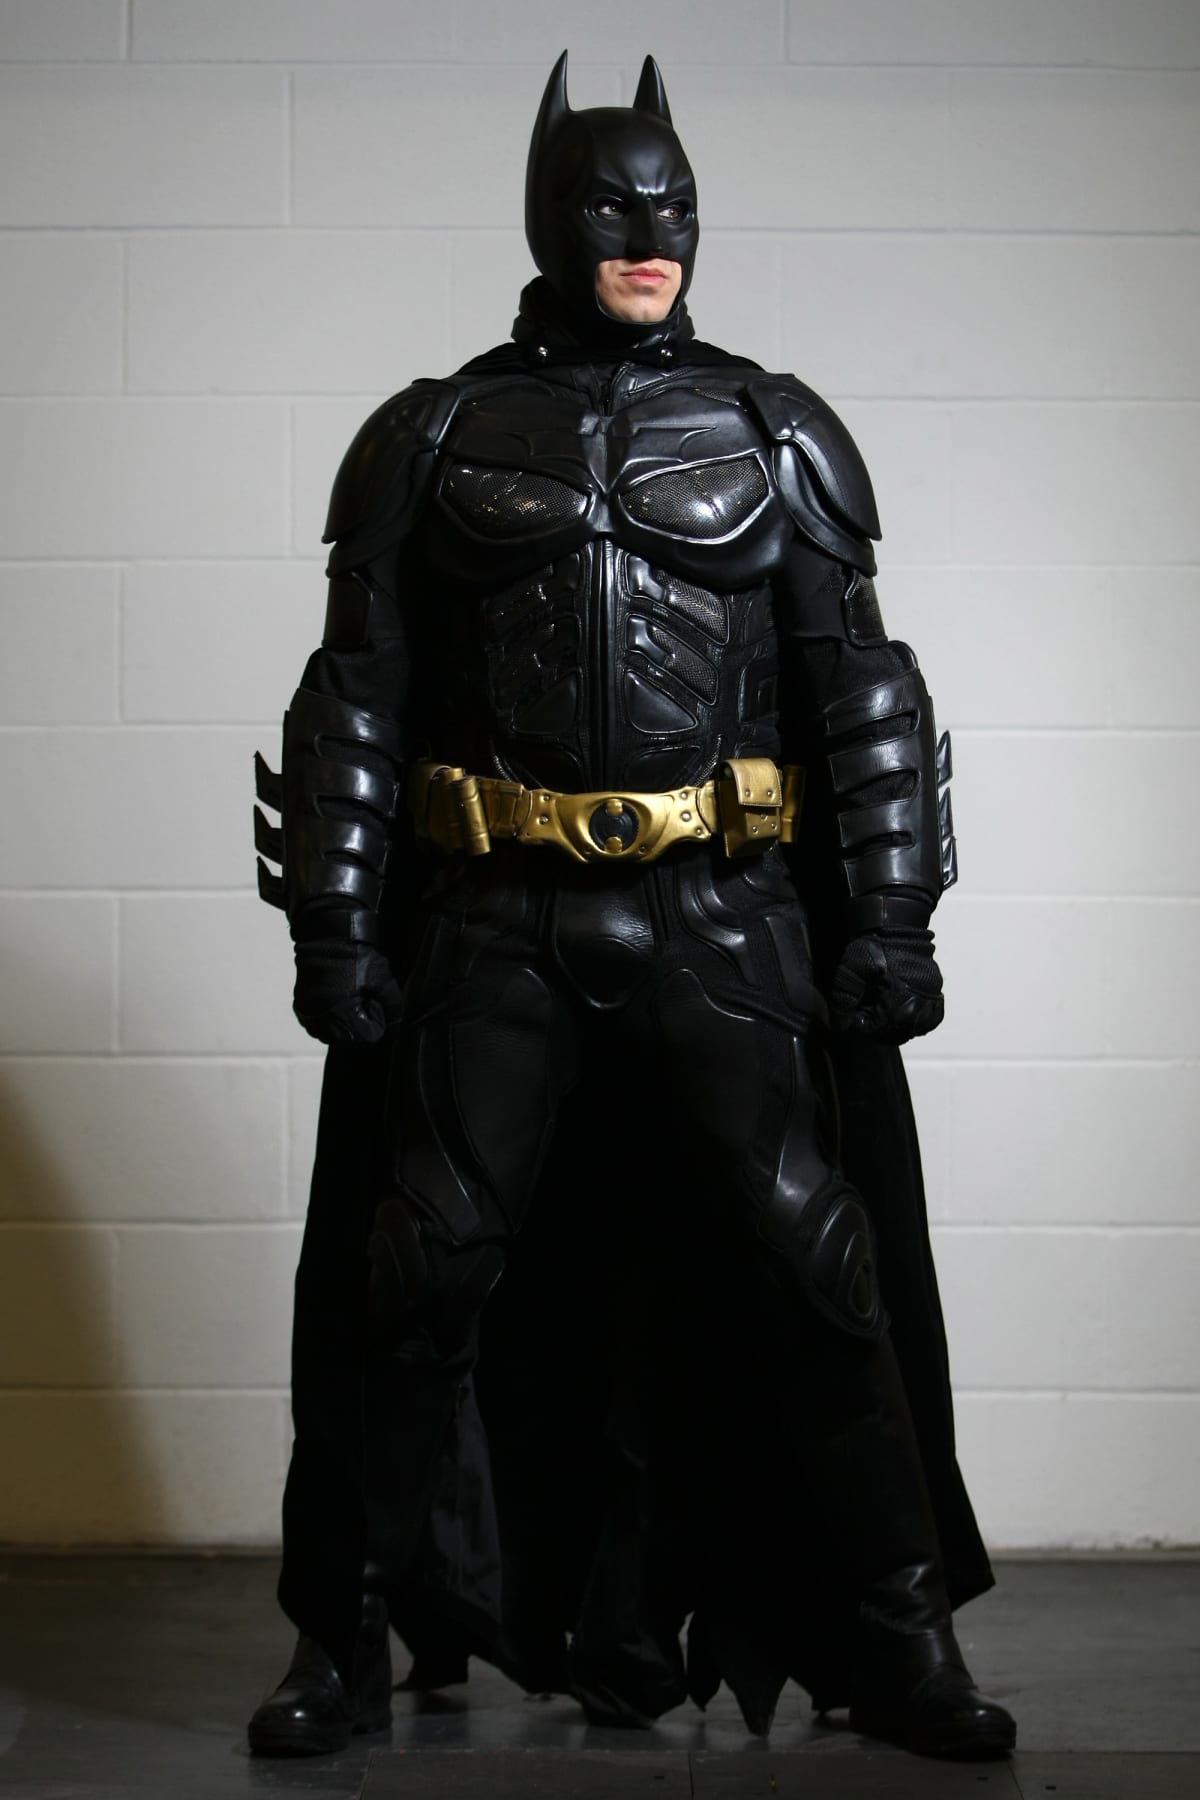 LONDON, ENGLAND - FEBRUARY 23:  An actor dressed as Batman poses for a photo at the London Super Comic Convention at the ExCeL Centre on February 23, 2013 in London, England. Enthusiasts at the Comic Convention are encouraged to wear a costume of their favourite comic character and flock to the ExCeL to gather all the latest news in the world of comics, manga, anime, film, cosplay, games and cult fiction.  (Photo by Jordan Mansfield/Getty Images)